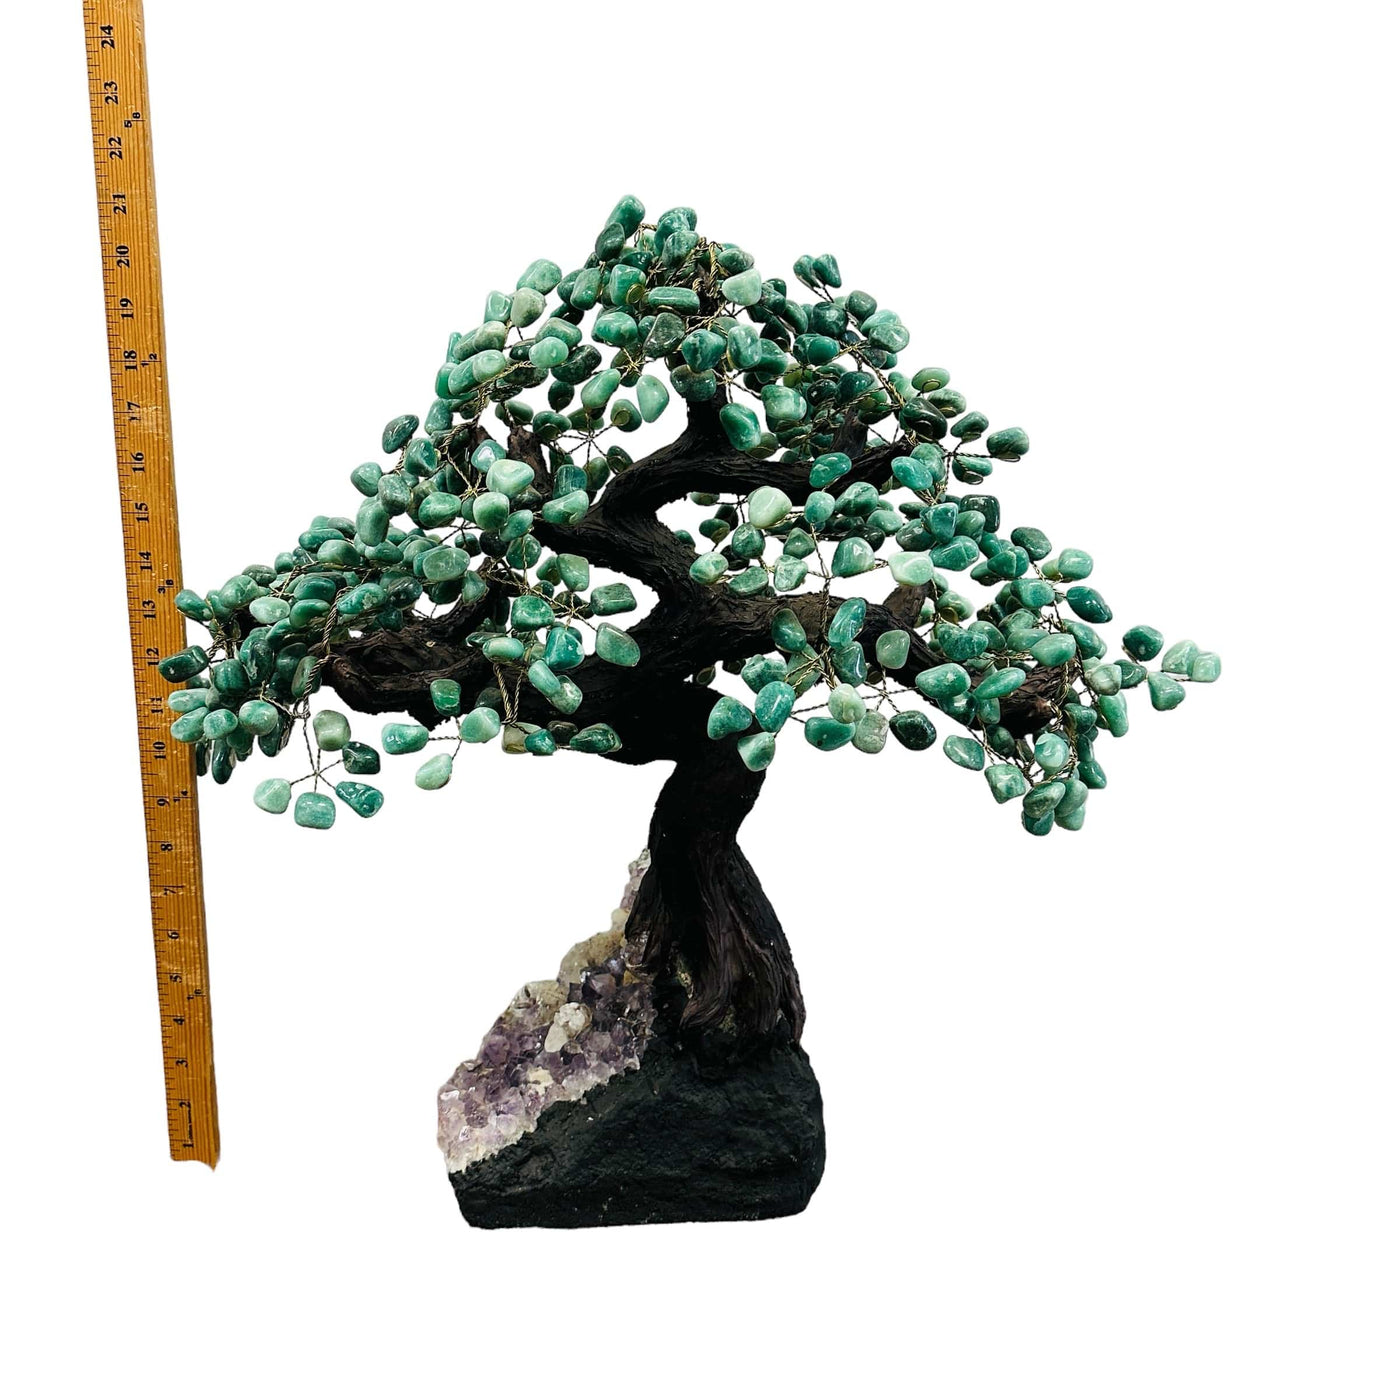 green aventurine tree on amethyst stand next to a ruler for size reference